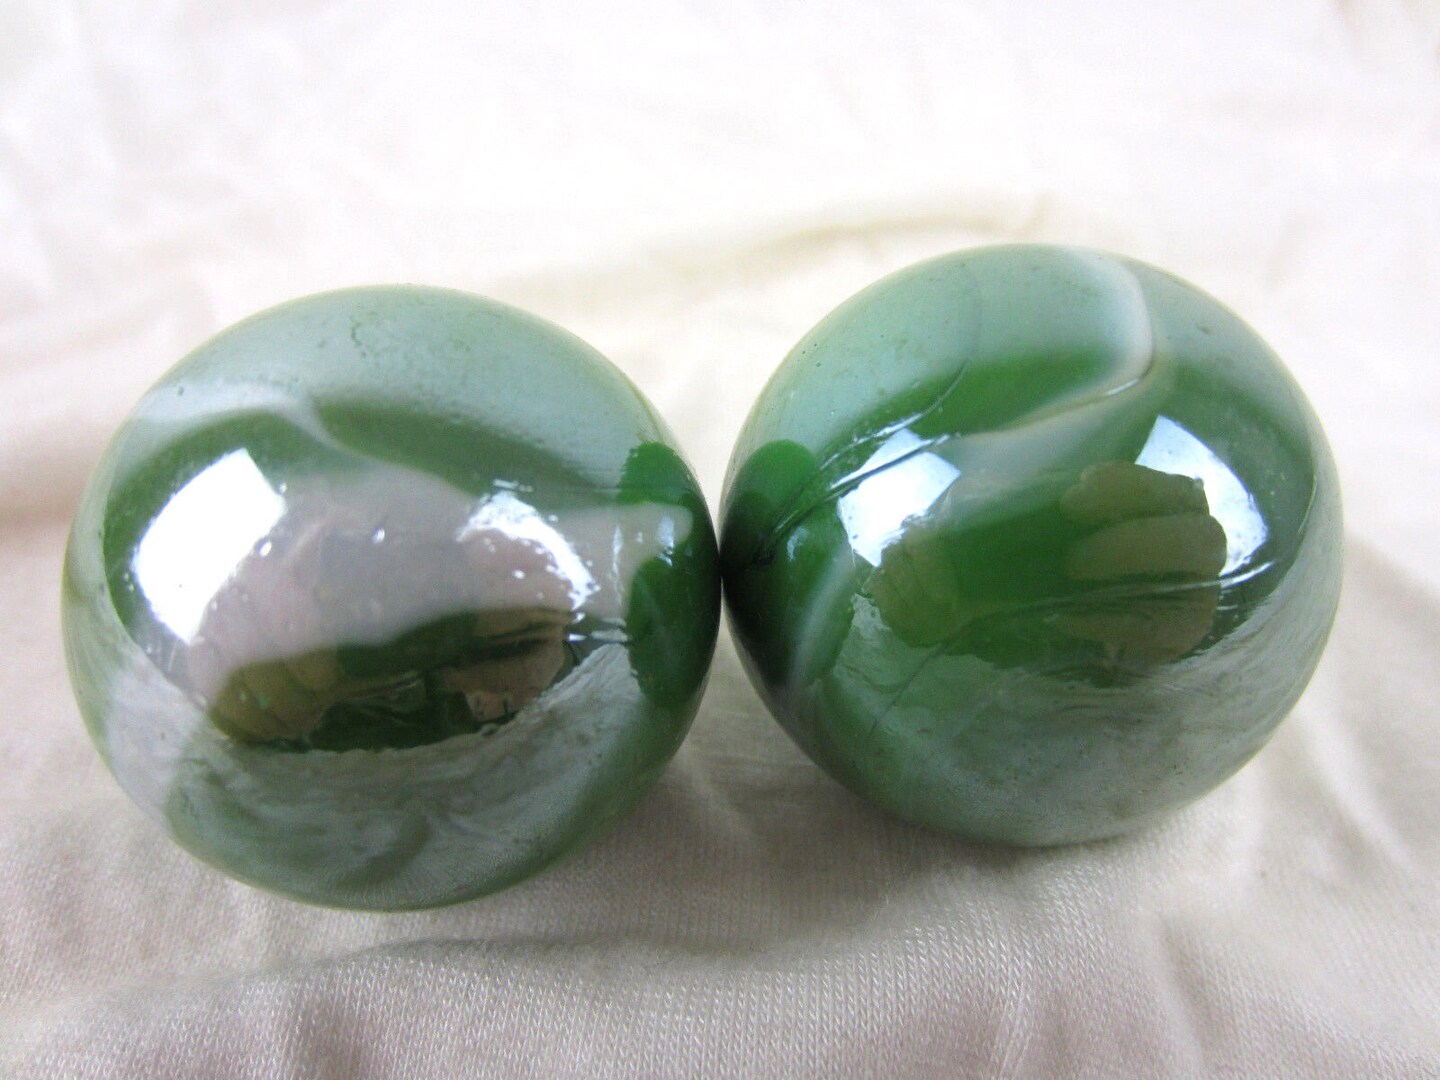 2 Boulders 35mm FUNGUS Marbles glass ball Green White Iridescent large Swirl